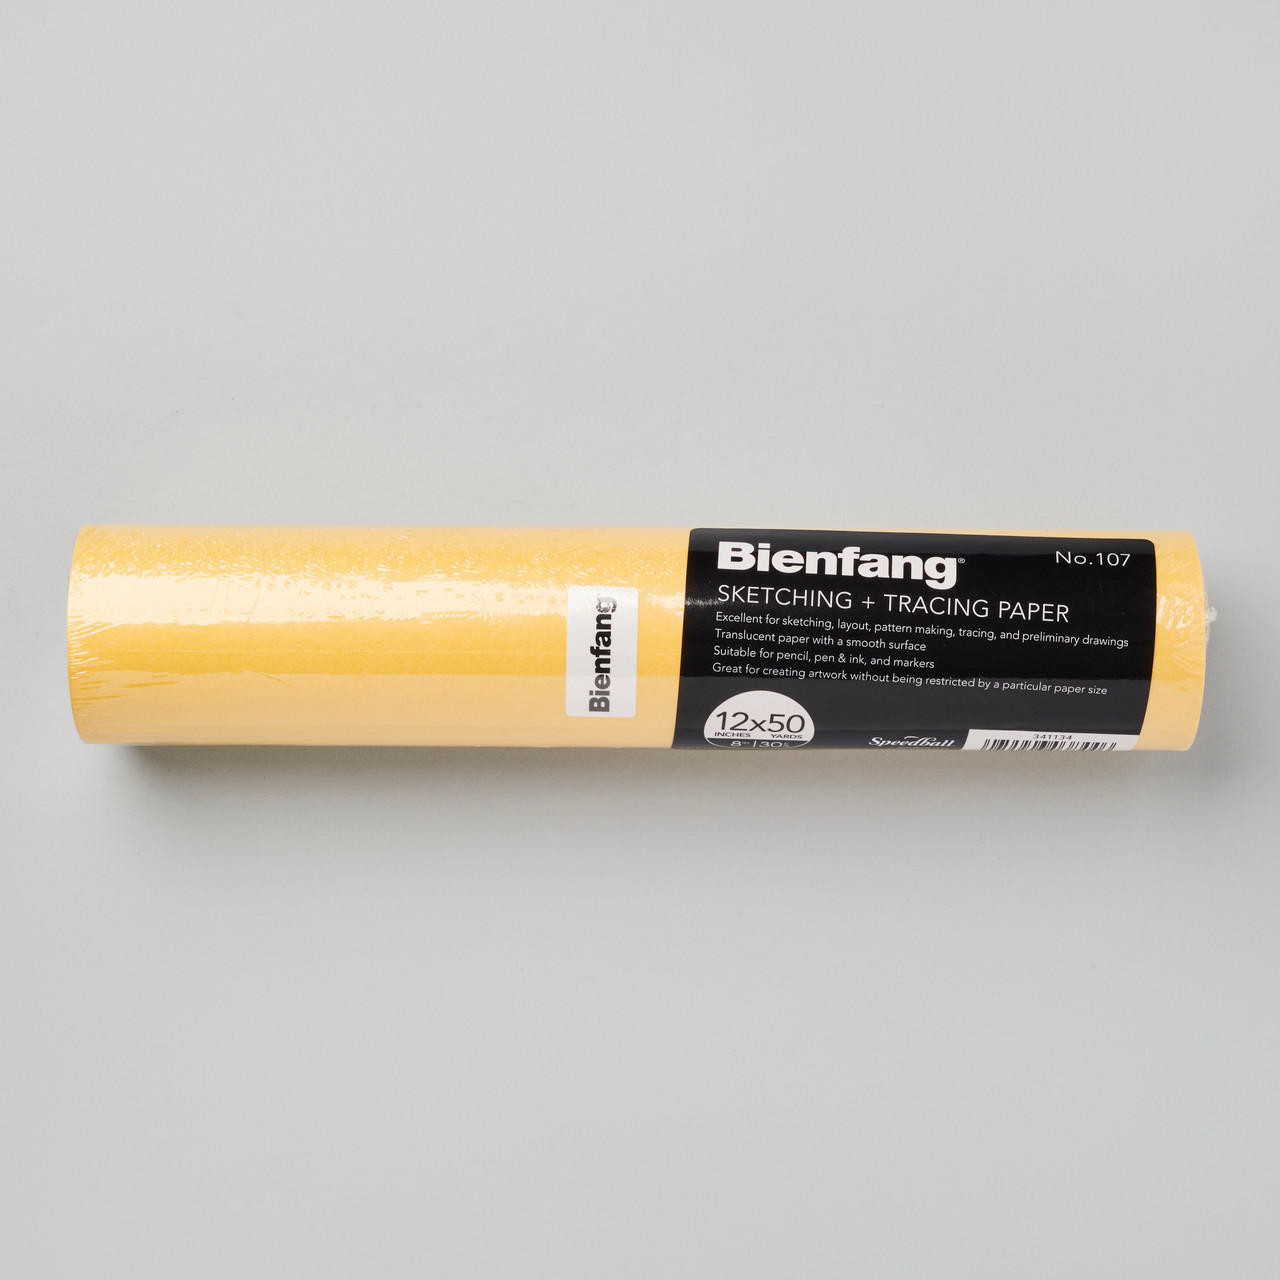 Bienfang Sketching and Tracing Paper Roll No 107 28gsm Canary